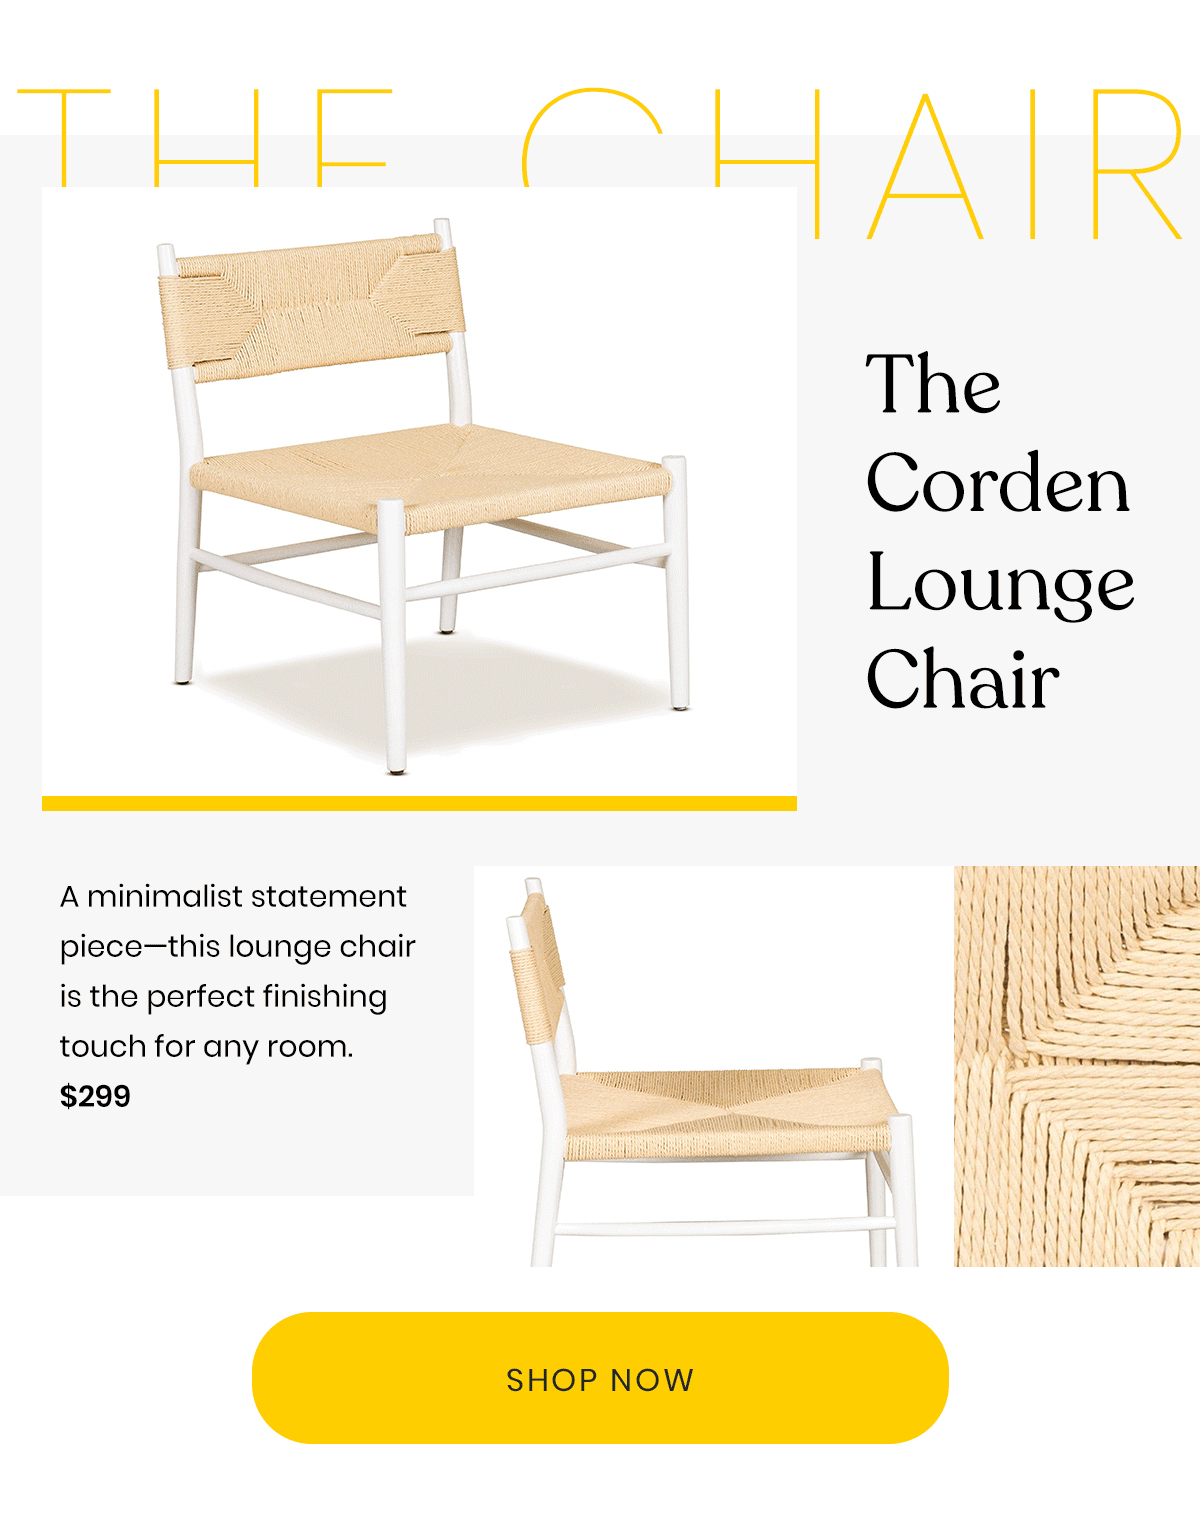 The Chair | The Corden Lounge Chair | A minimalist statement piece - this lounge chair is the perfect finishing touch for any room. | $299 | Shop Now